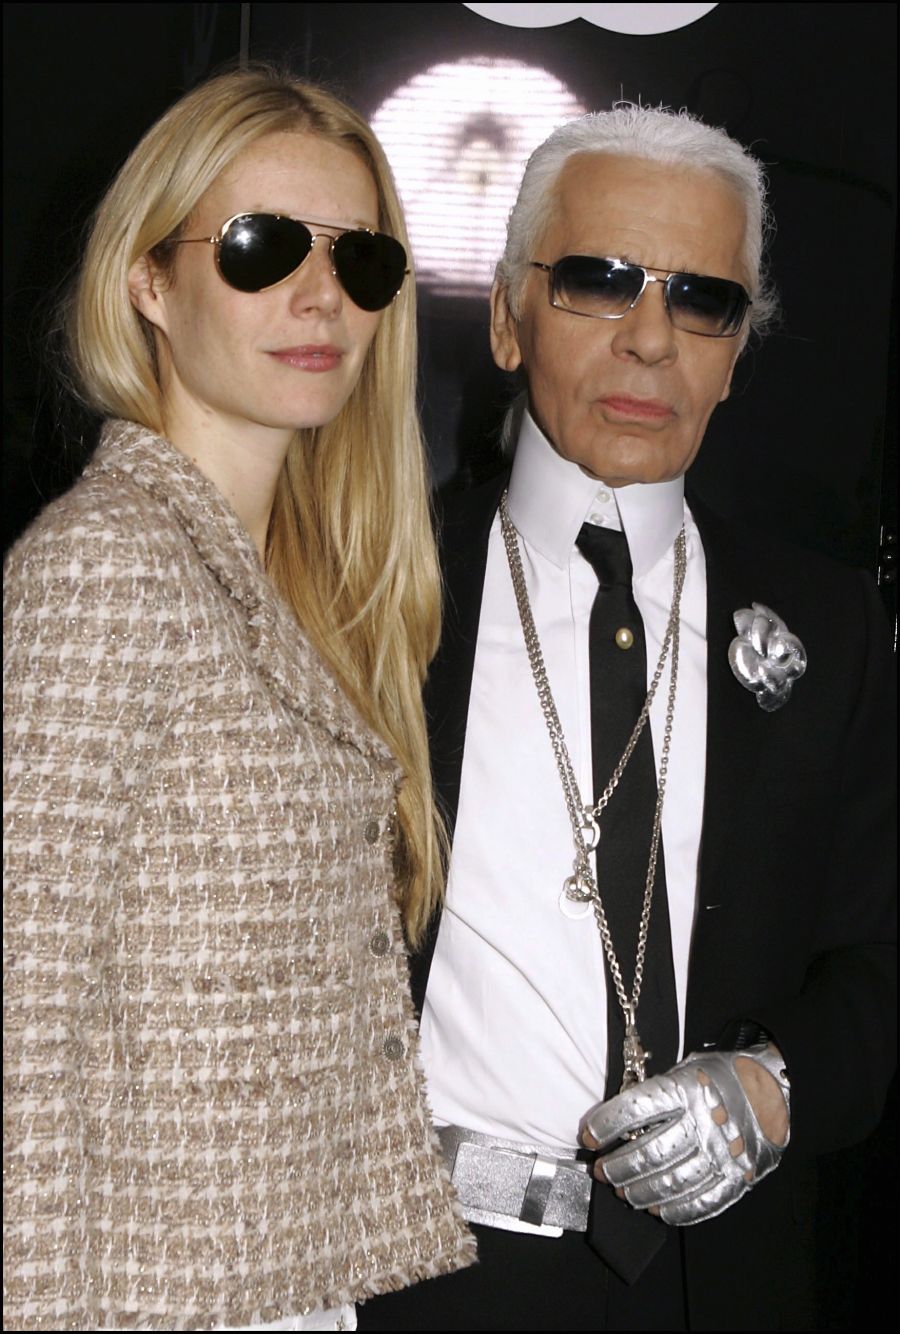 18 Fashionable Photos Of Karl Lagerfeld & His Famous Friends - Hot 107. ...